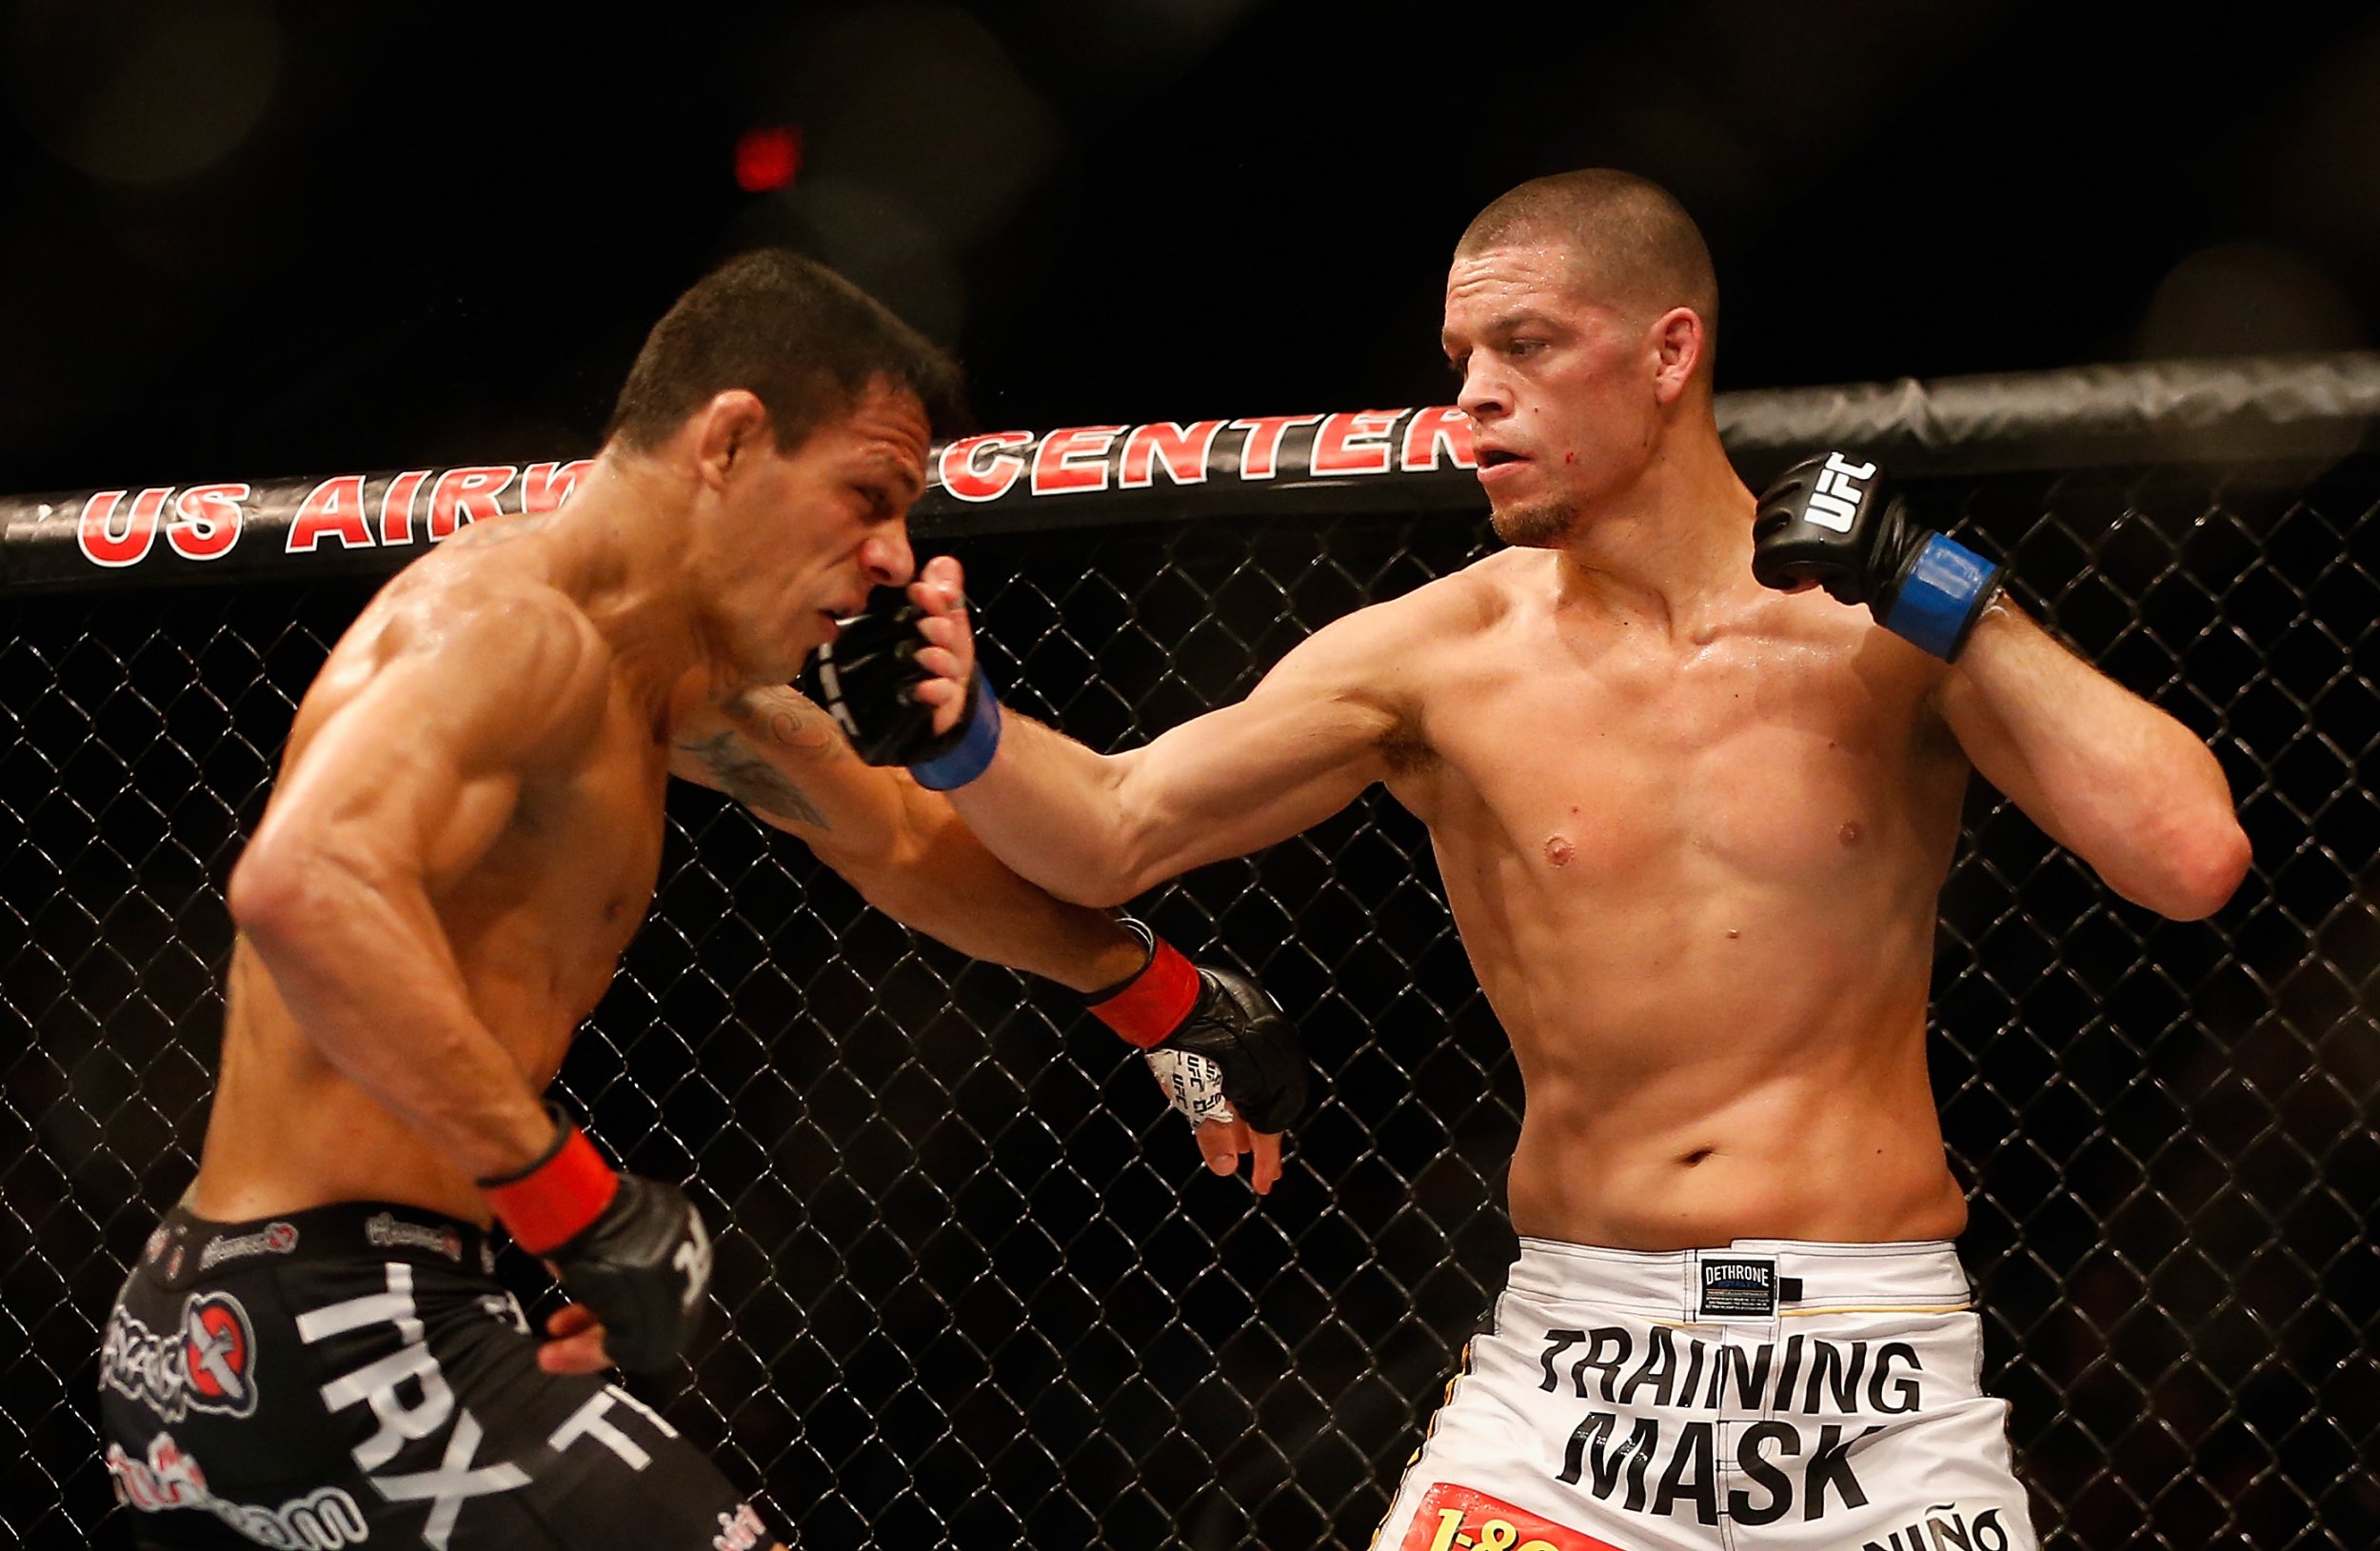 Nate Diaz, Right, Has Stepped In To Face Conor Mcgregor - Nate Diaz Dos Anjos - HD Wallpaper 